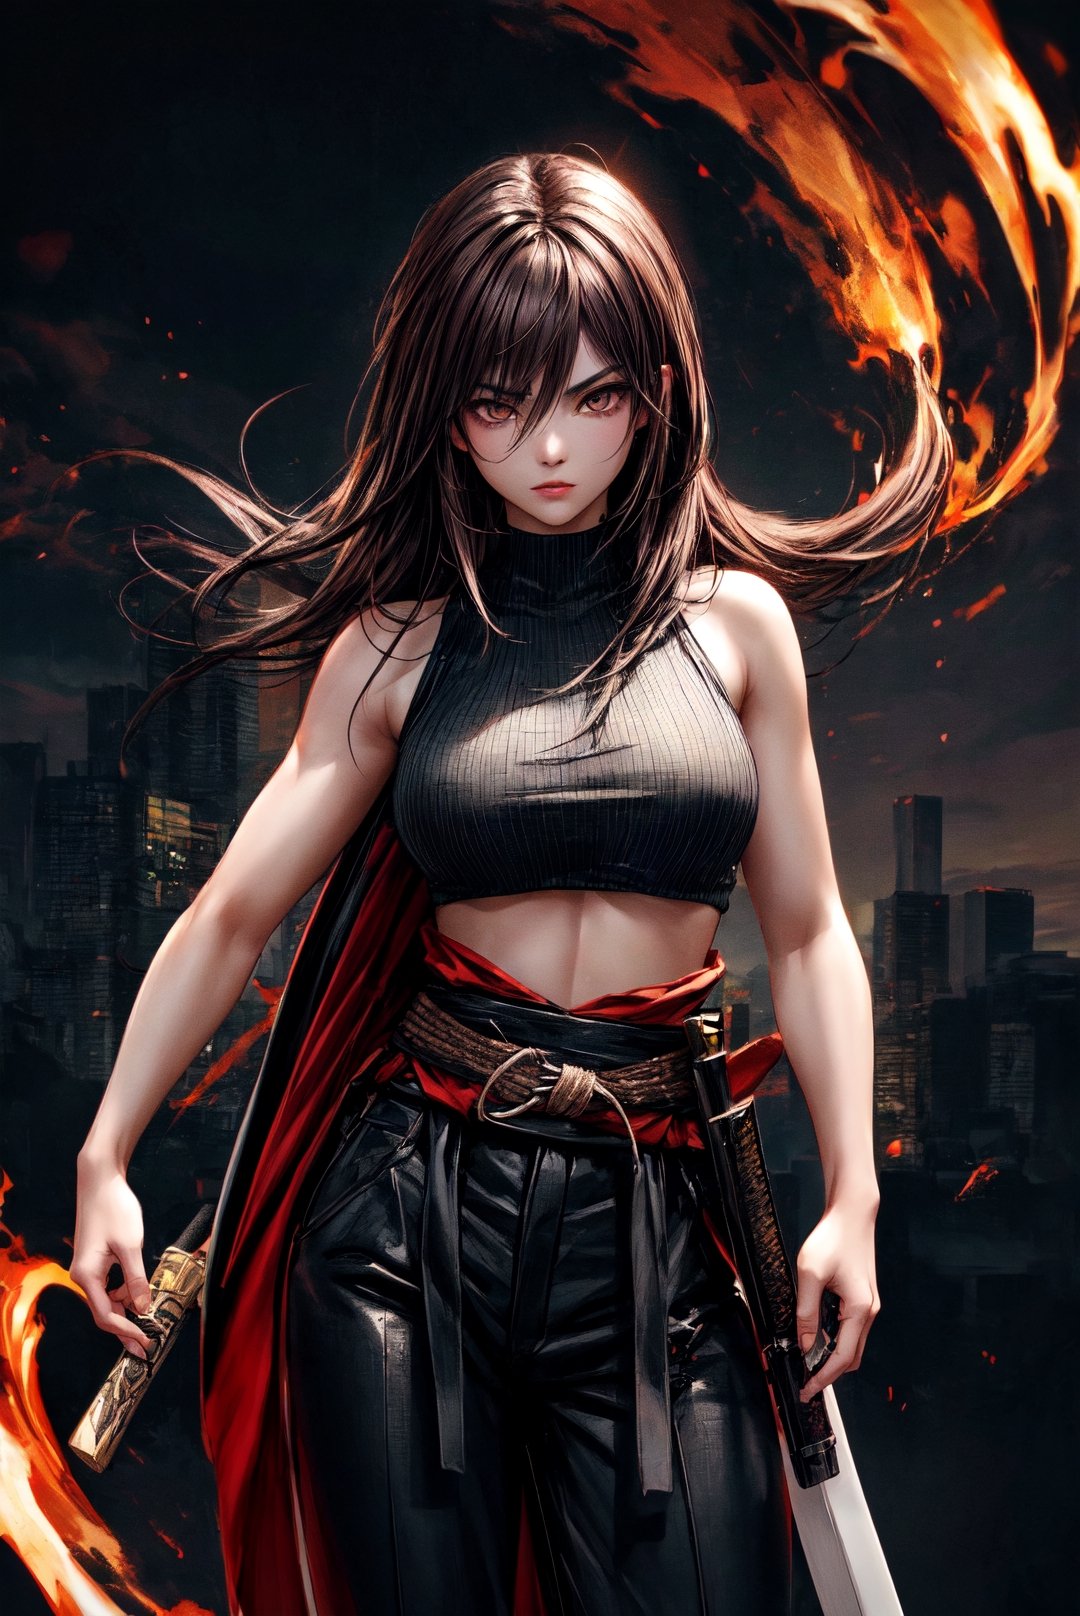 {[(8K quality image), (full body), (ultra quality image), (ultra detailed image), (perfect body), (super detailed)]}, 
Woman samurai, long black hair, reddish brown eyes, defined body, combat stance, serious face, psychedelic setting, sexy woman, xogun age